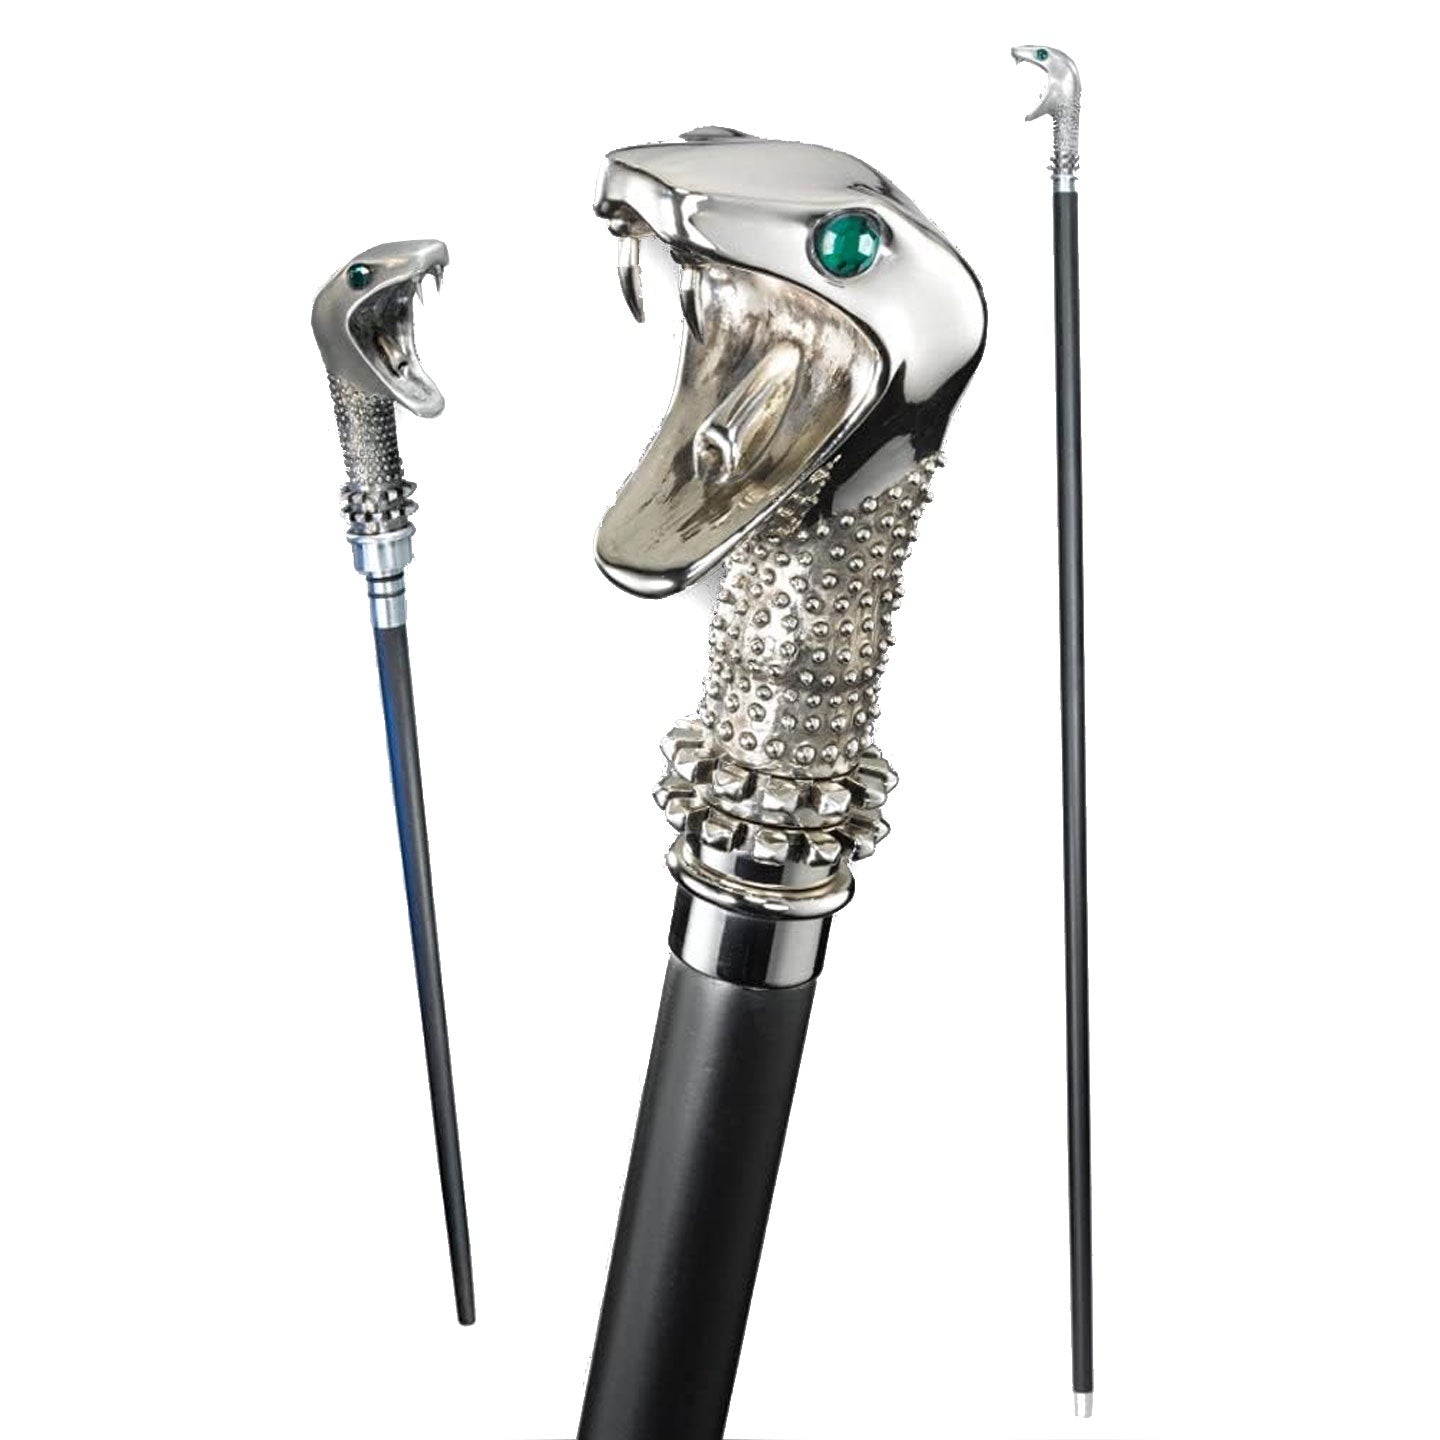 Lucius Malfoy's Walking Stick & Wand